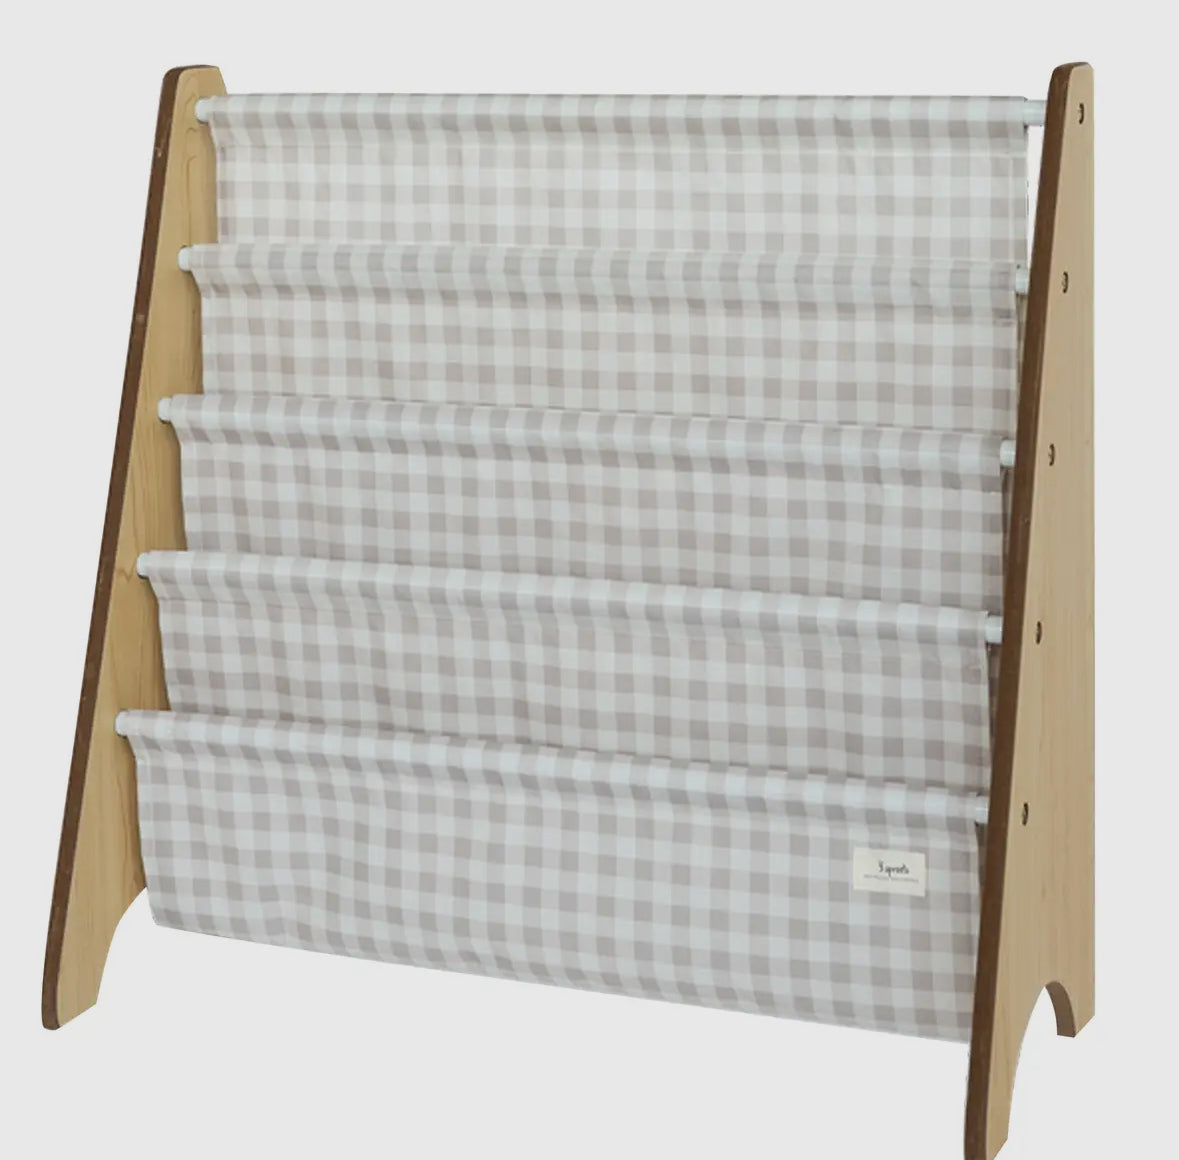 Recycled Fabric Kids Book Rack -Beige 
Gingham